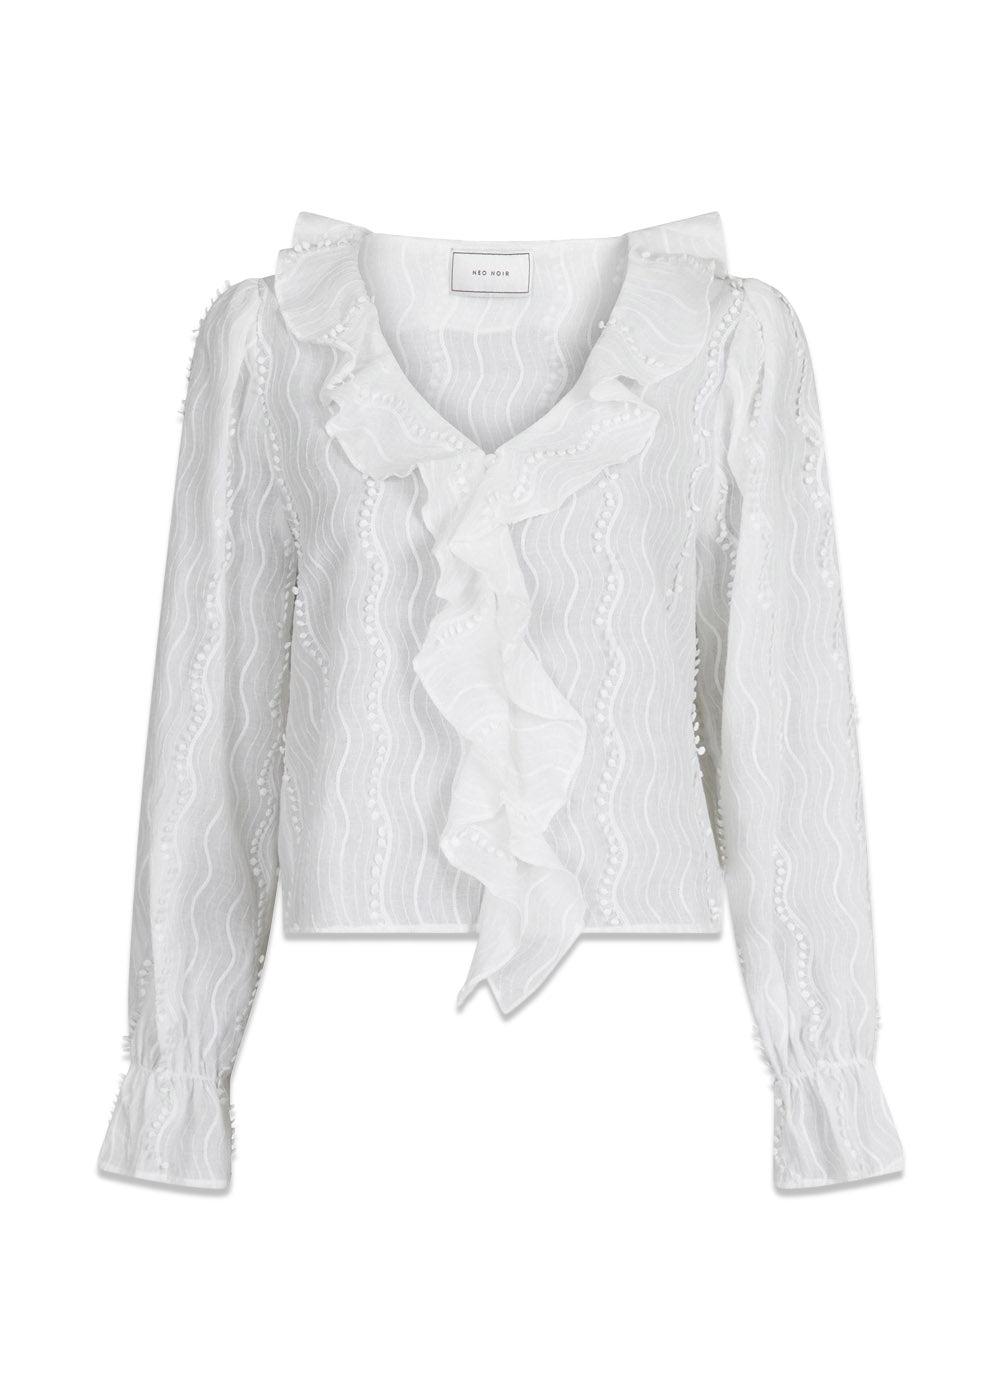 Neo Noirs Nanci Wave Blouse - Off White. Køb blouses her.